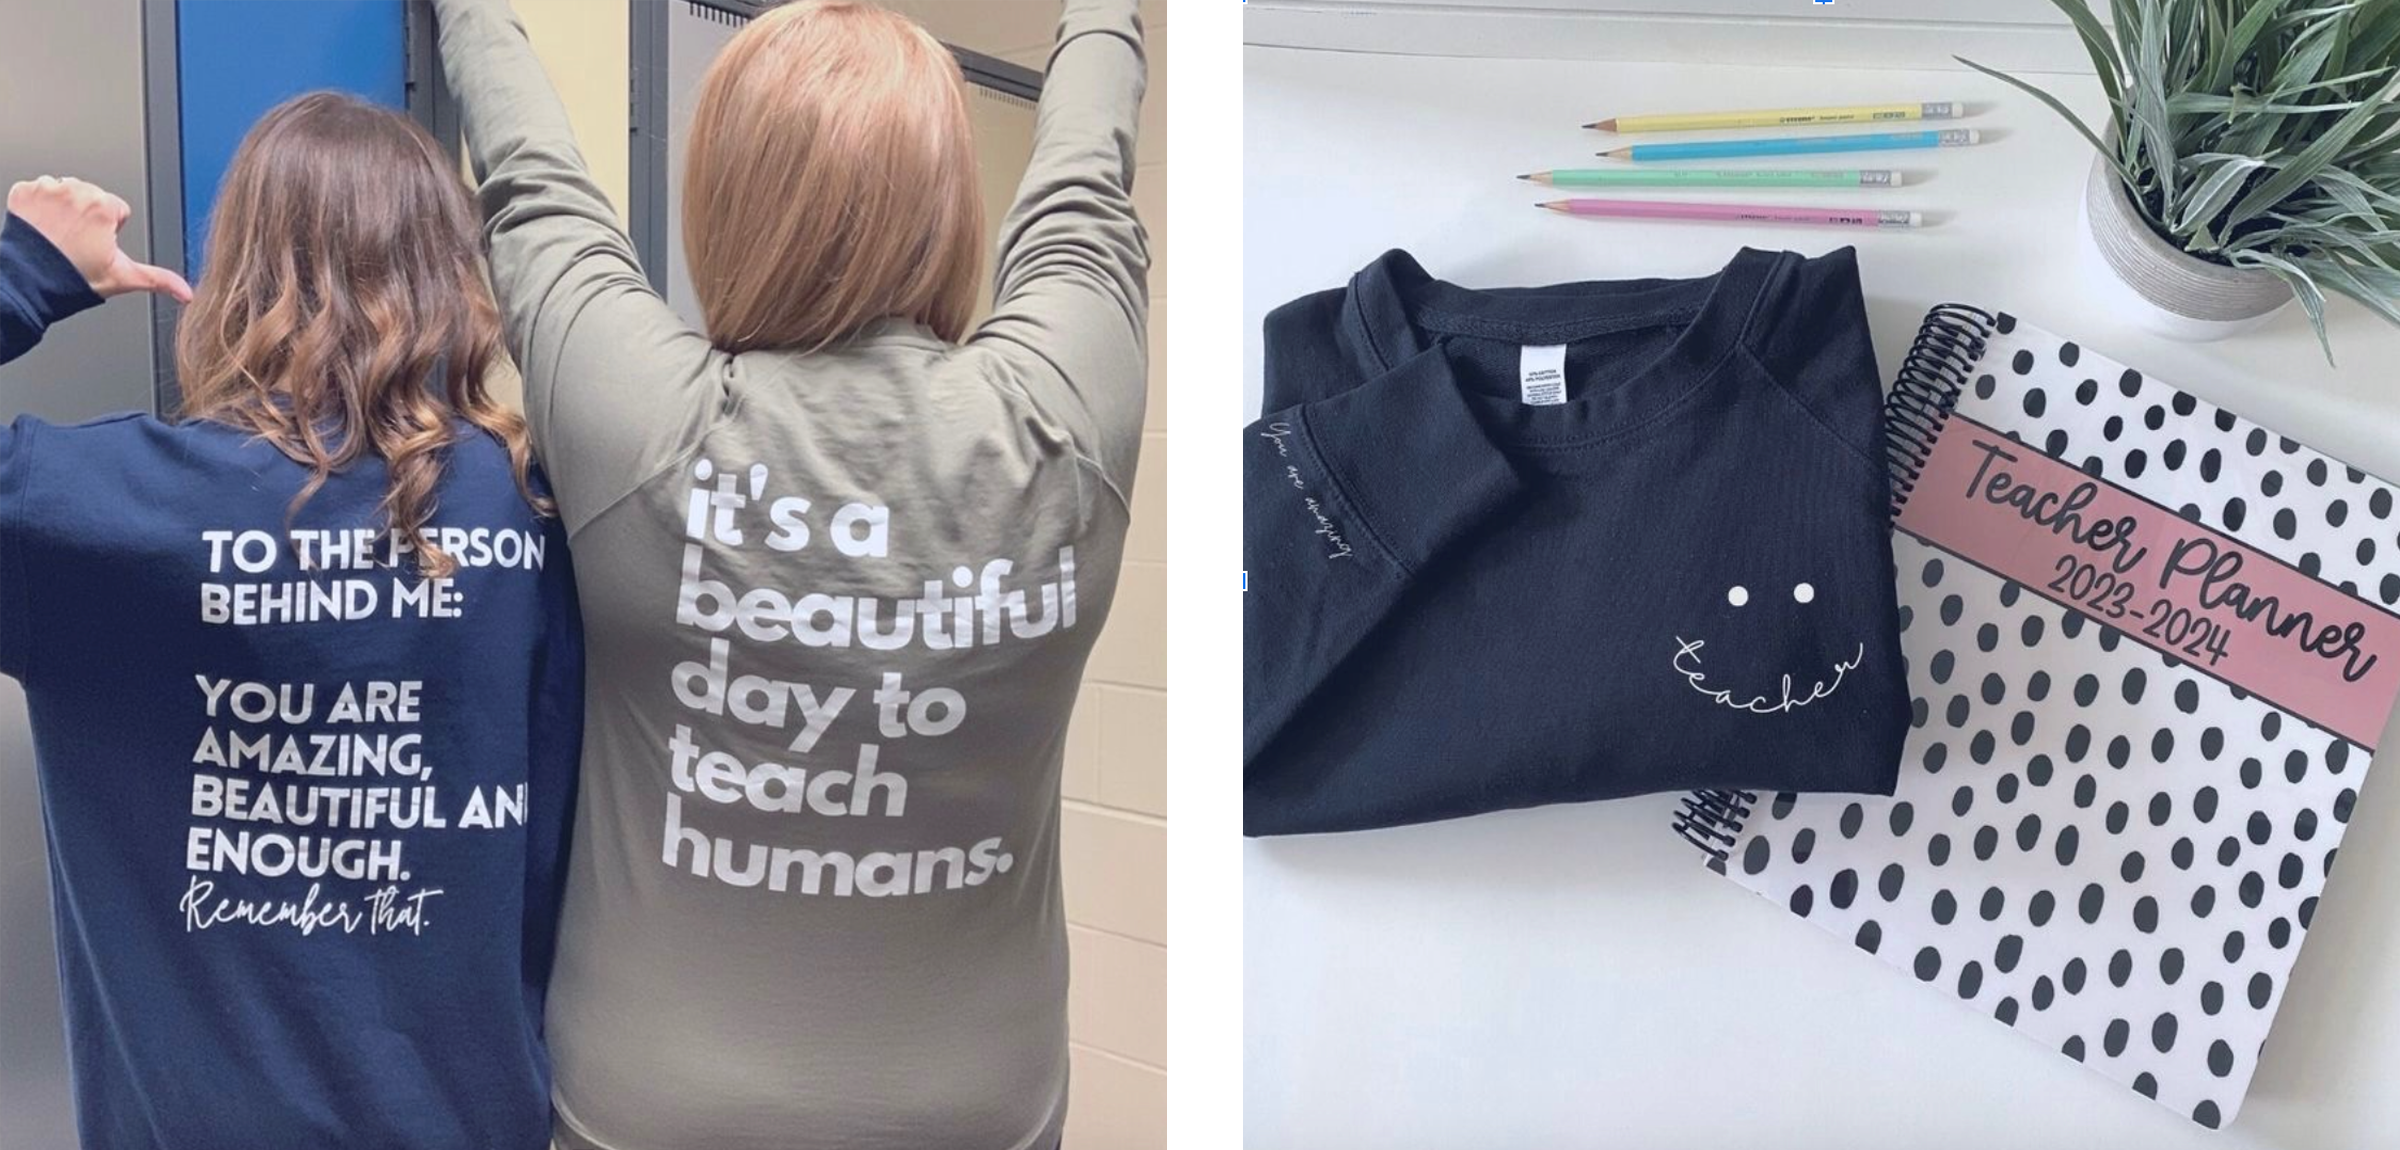 the backs of two people wearing t-shirts with creative phrases